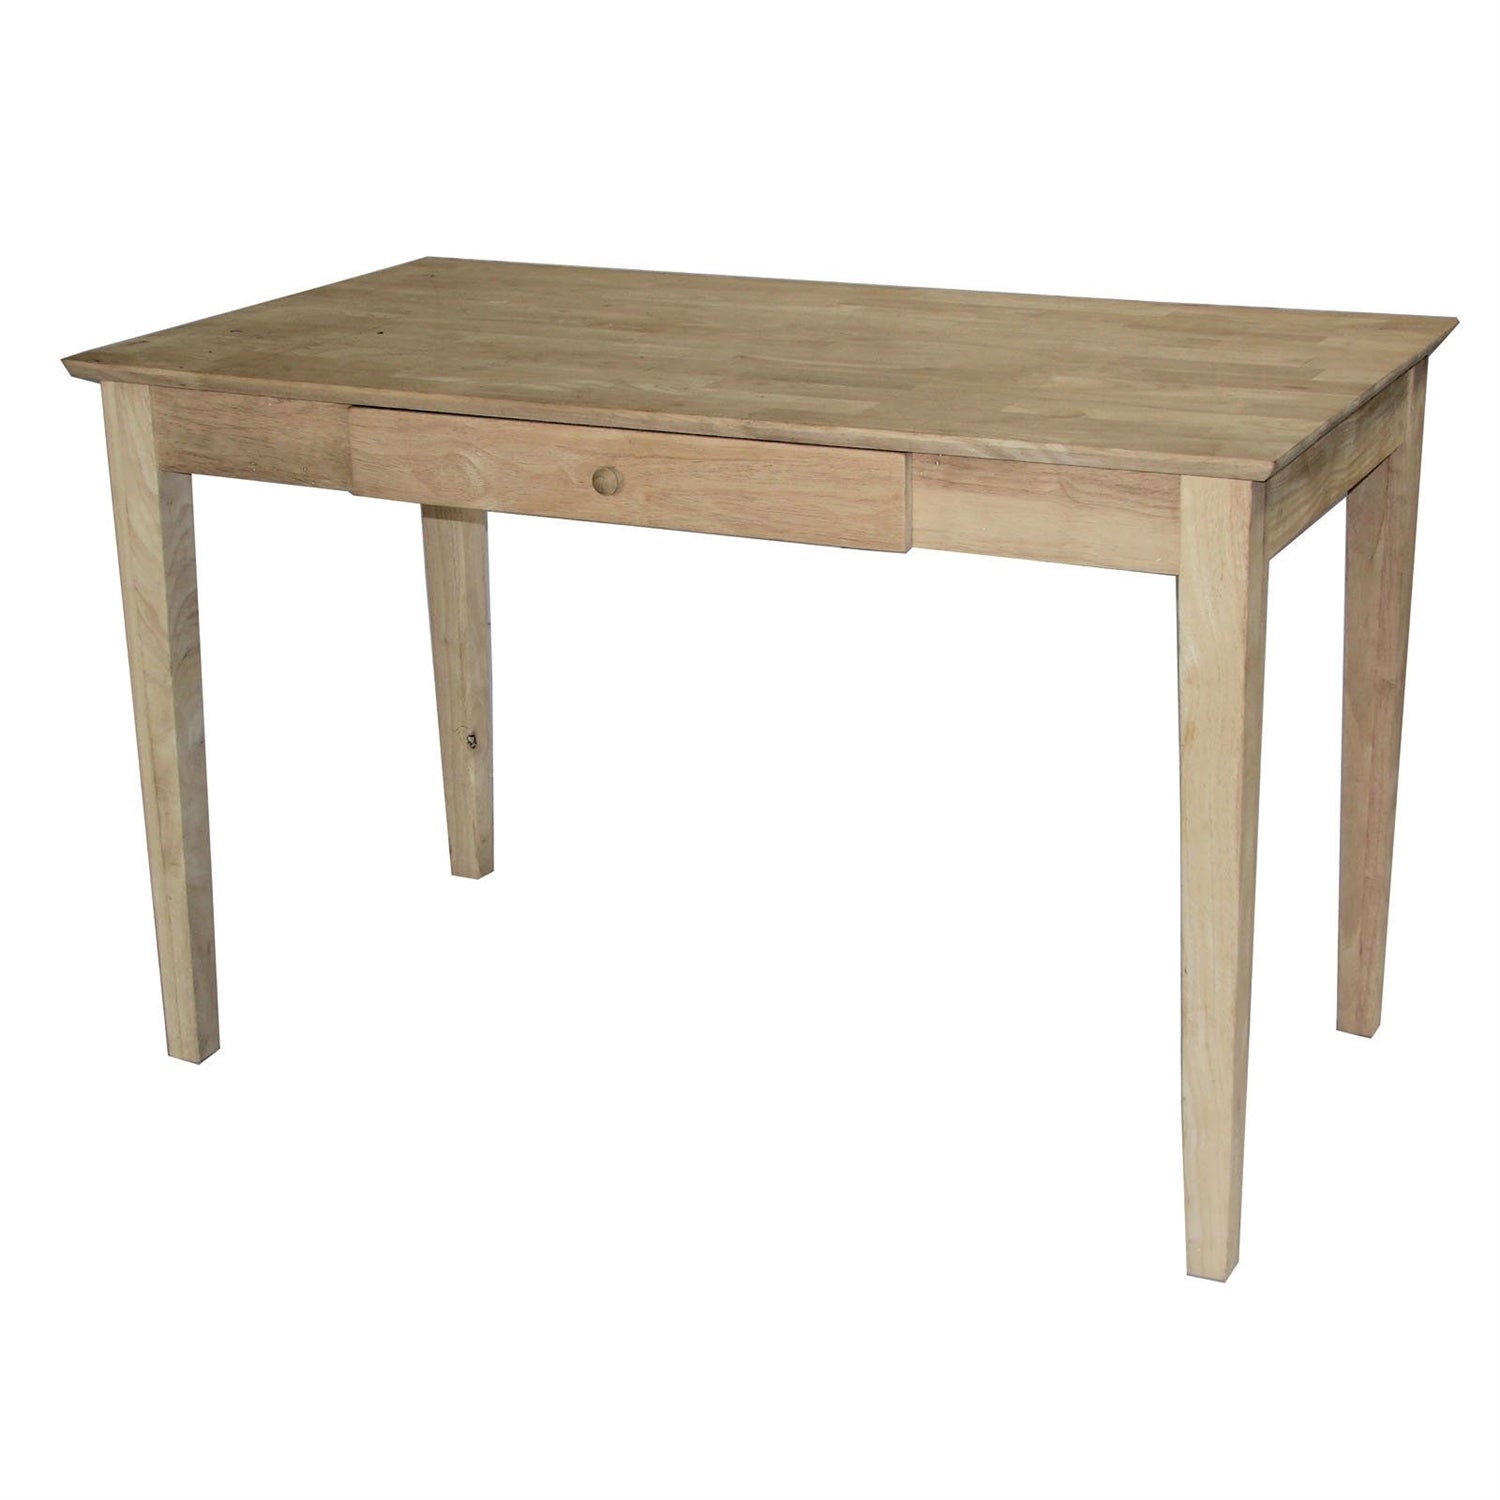 FastFurnishings Unfinished Solid Wood Desk Laptop Computer Writing Table with Drawer